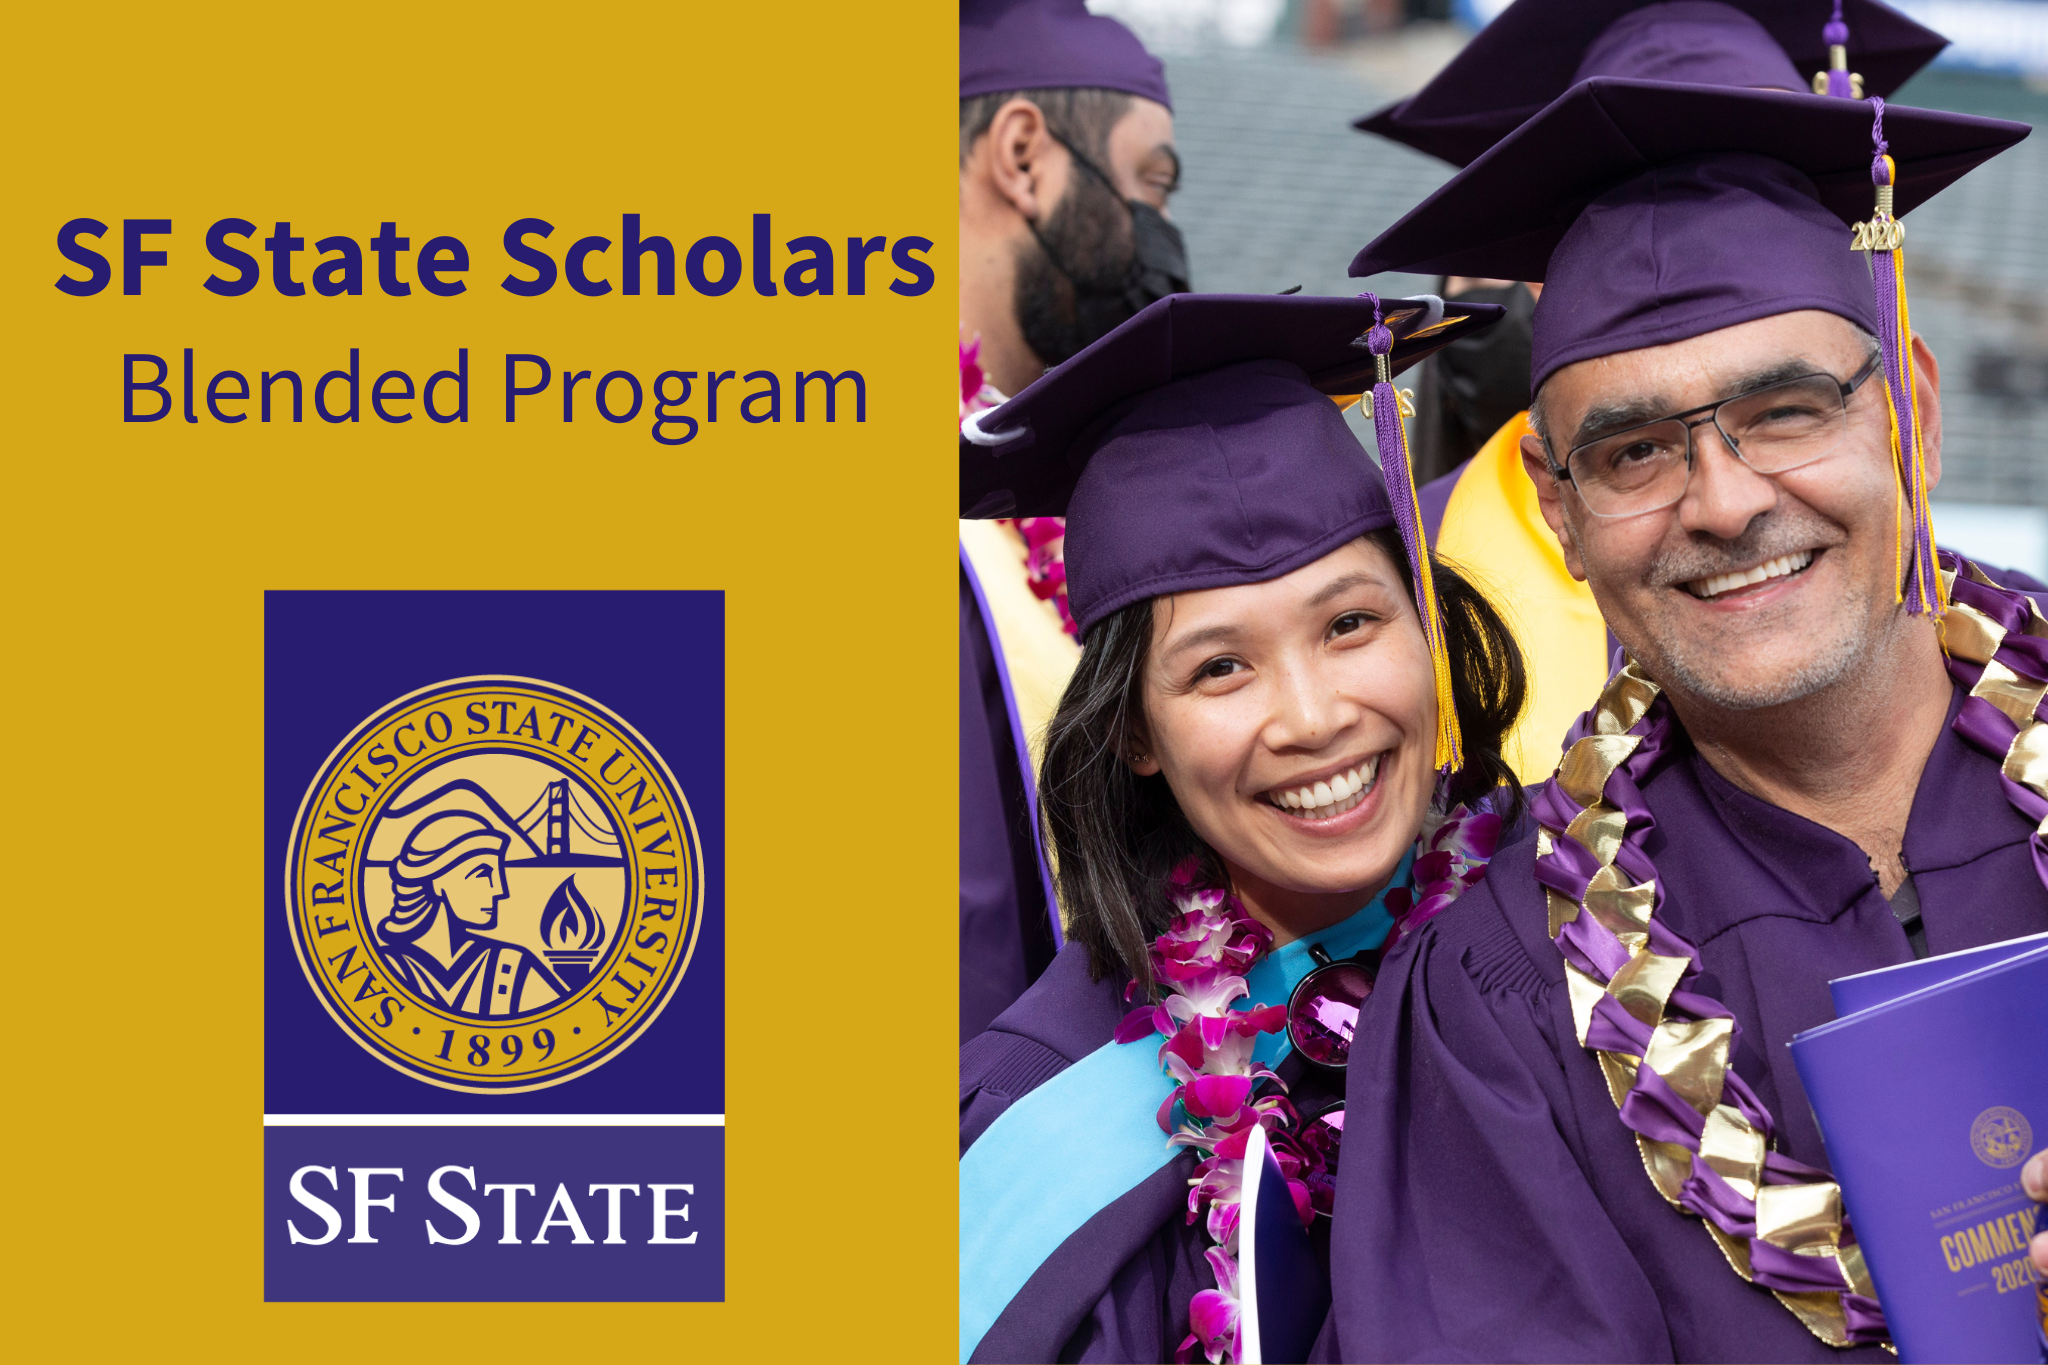 SF State Scholars Blended Program, university seal, and two graduates in cap and gown smiling